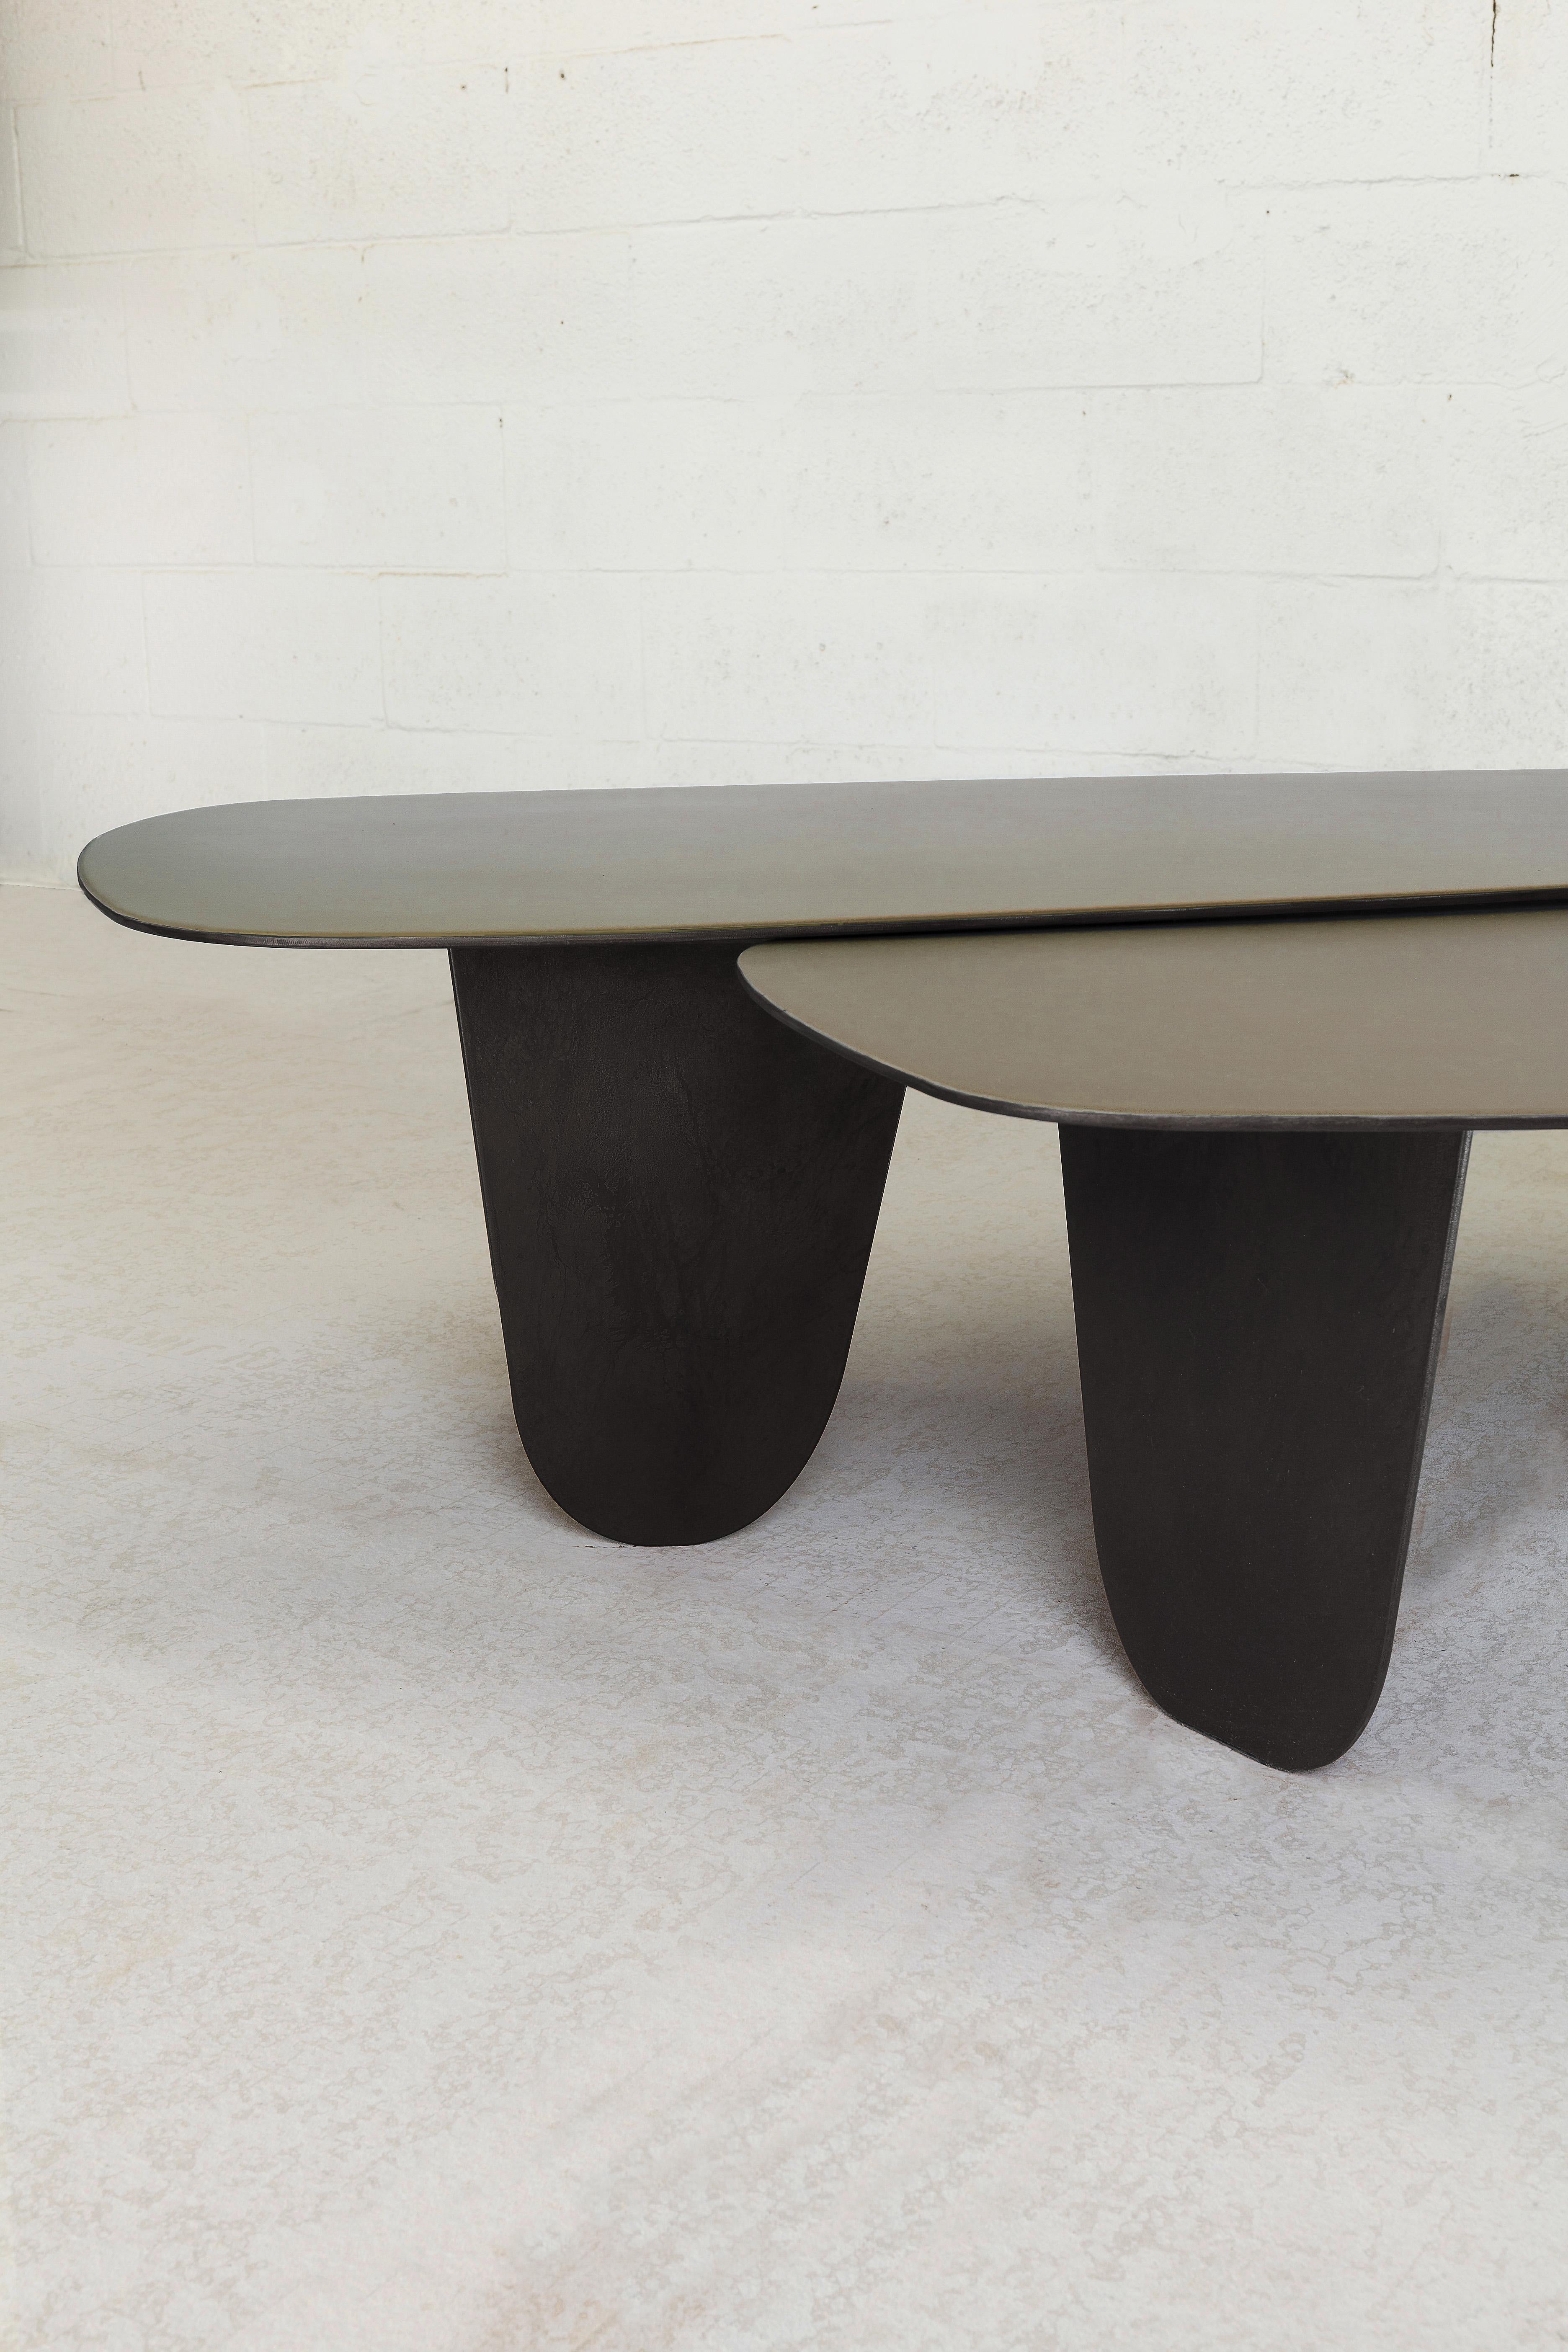 The Osaka tables draws inspiration from the Japanese philosophy of organic minimalism to create simplicity, harmony, and beauty in everyday objects. The table is crafted of steel and finished in a rich blackened patina that gives the piece a sense